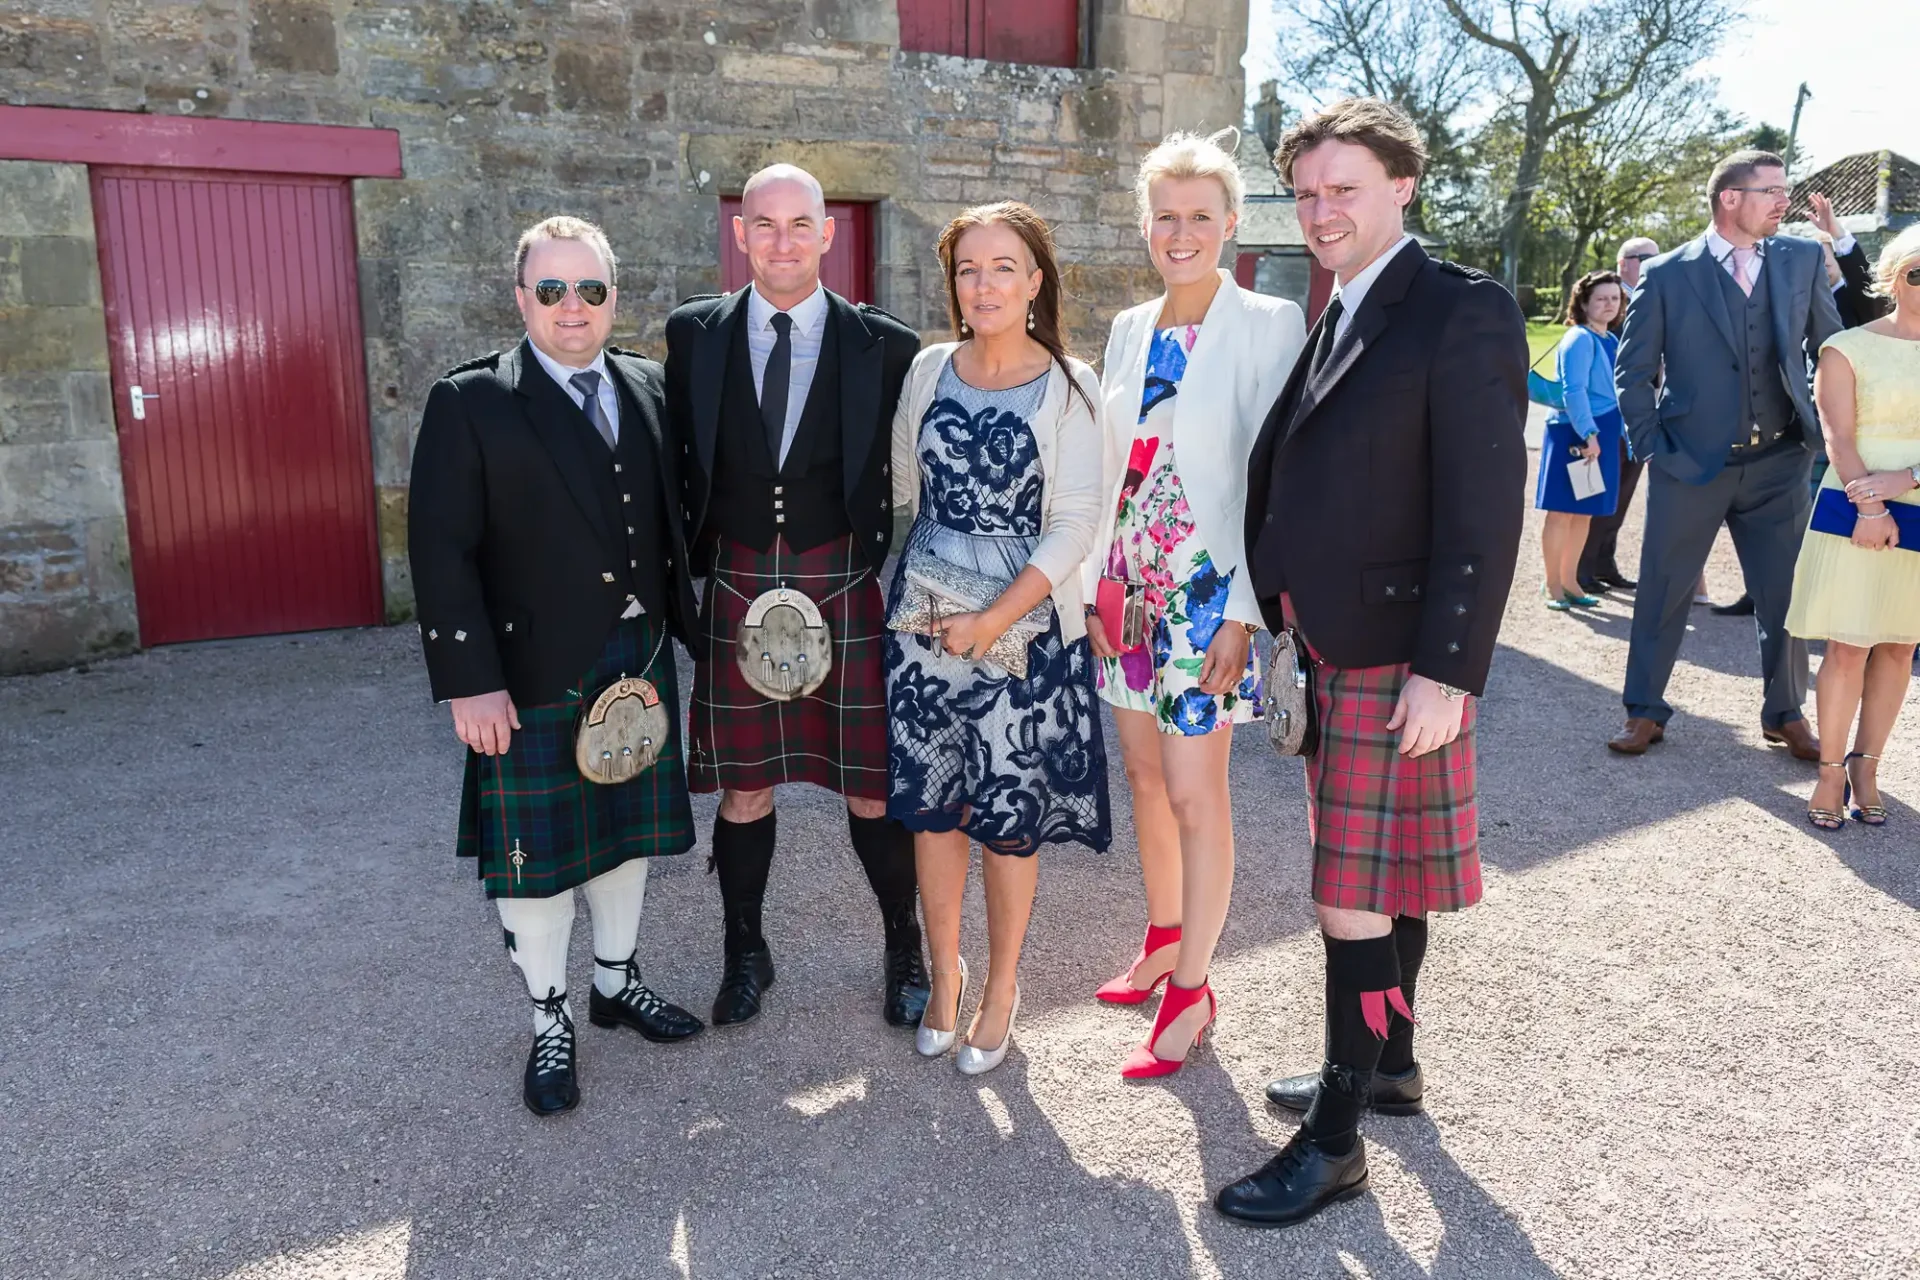 Group of five adults in formal attire, including kilts and dresses, standing outside at a social event on a sunny day.